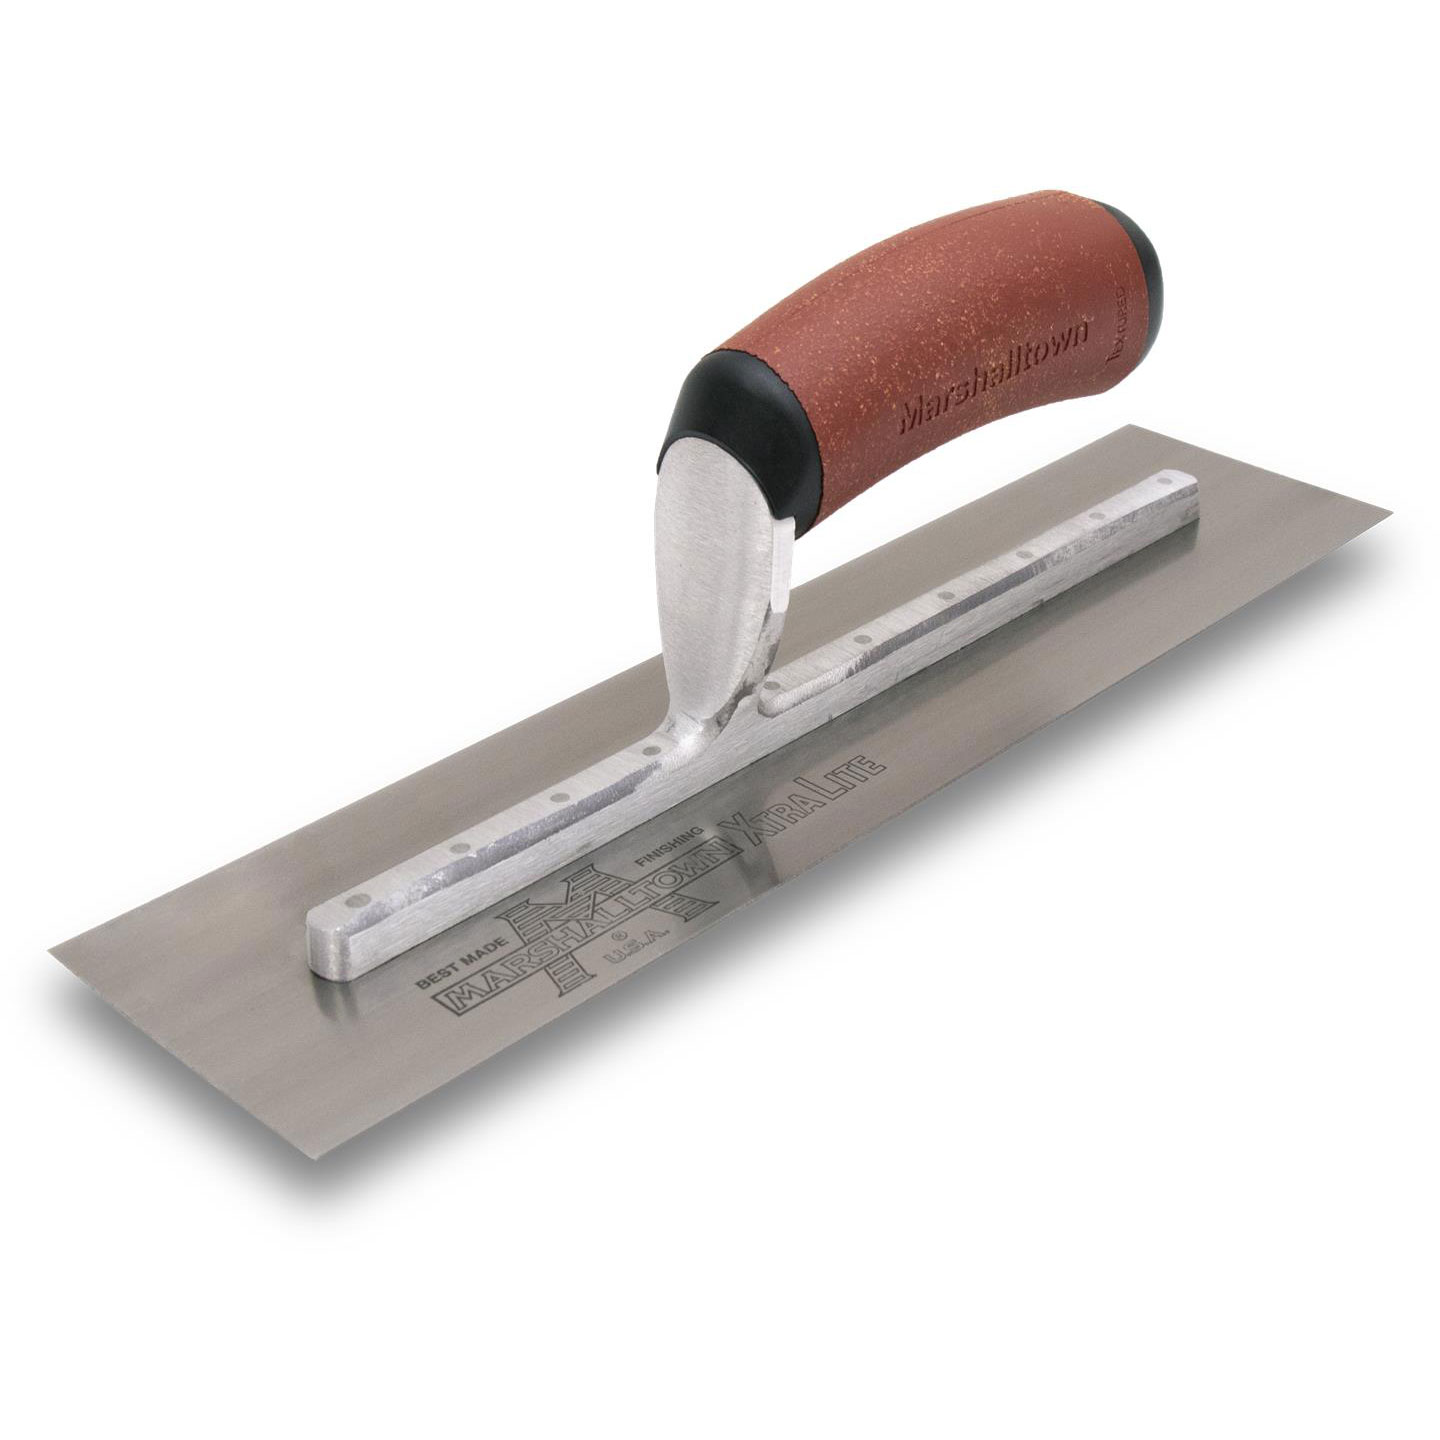 Marshalltown MXS68DC 16in x 4-3/4in Finishing Trowel with DuraCork Handle MXS68DC